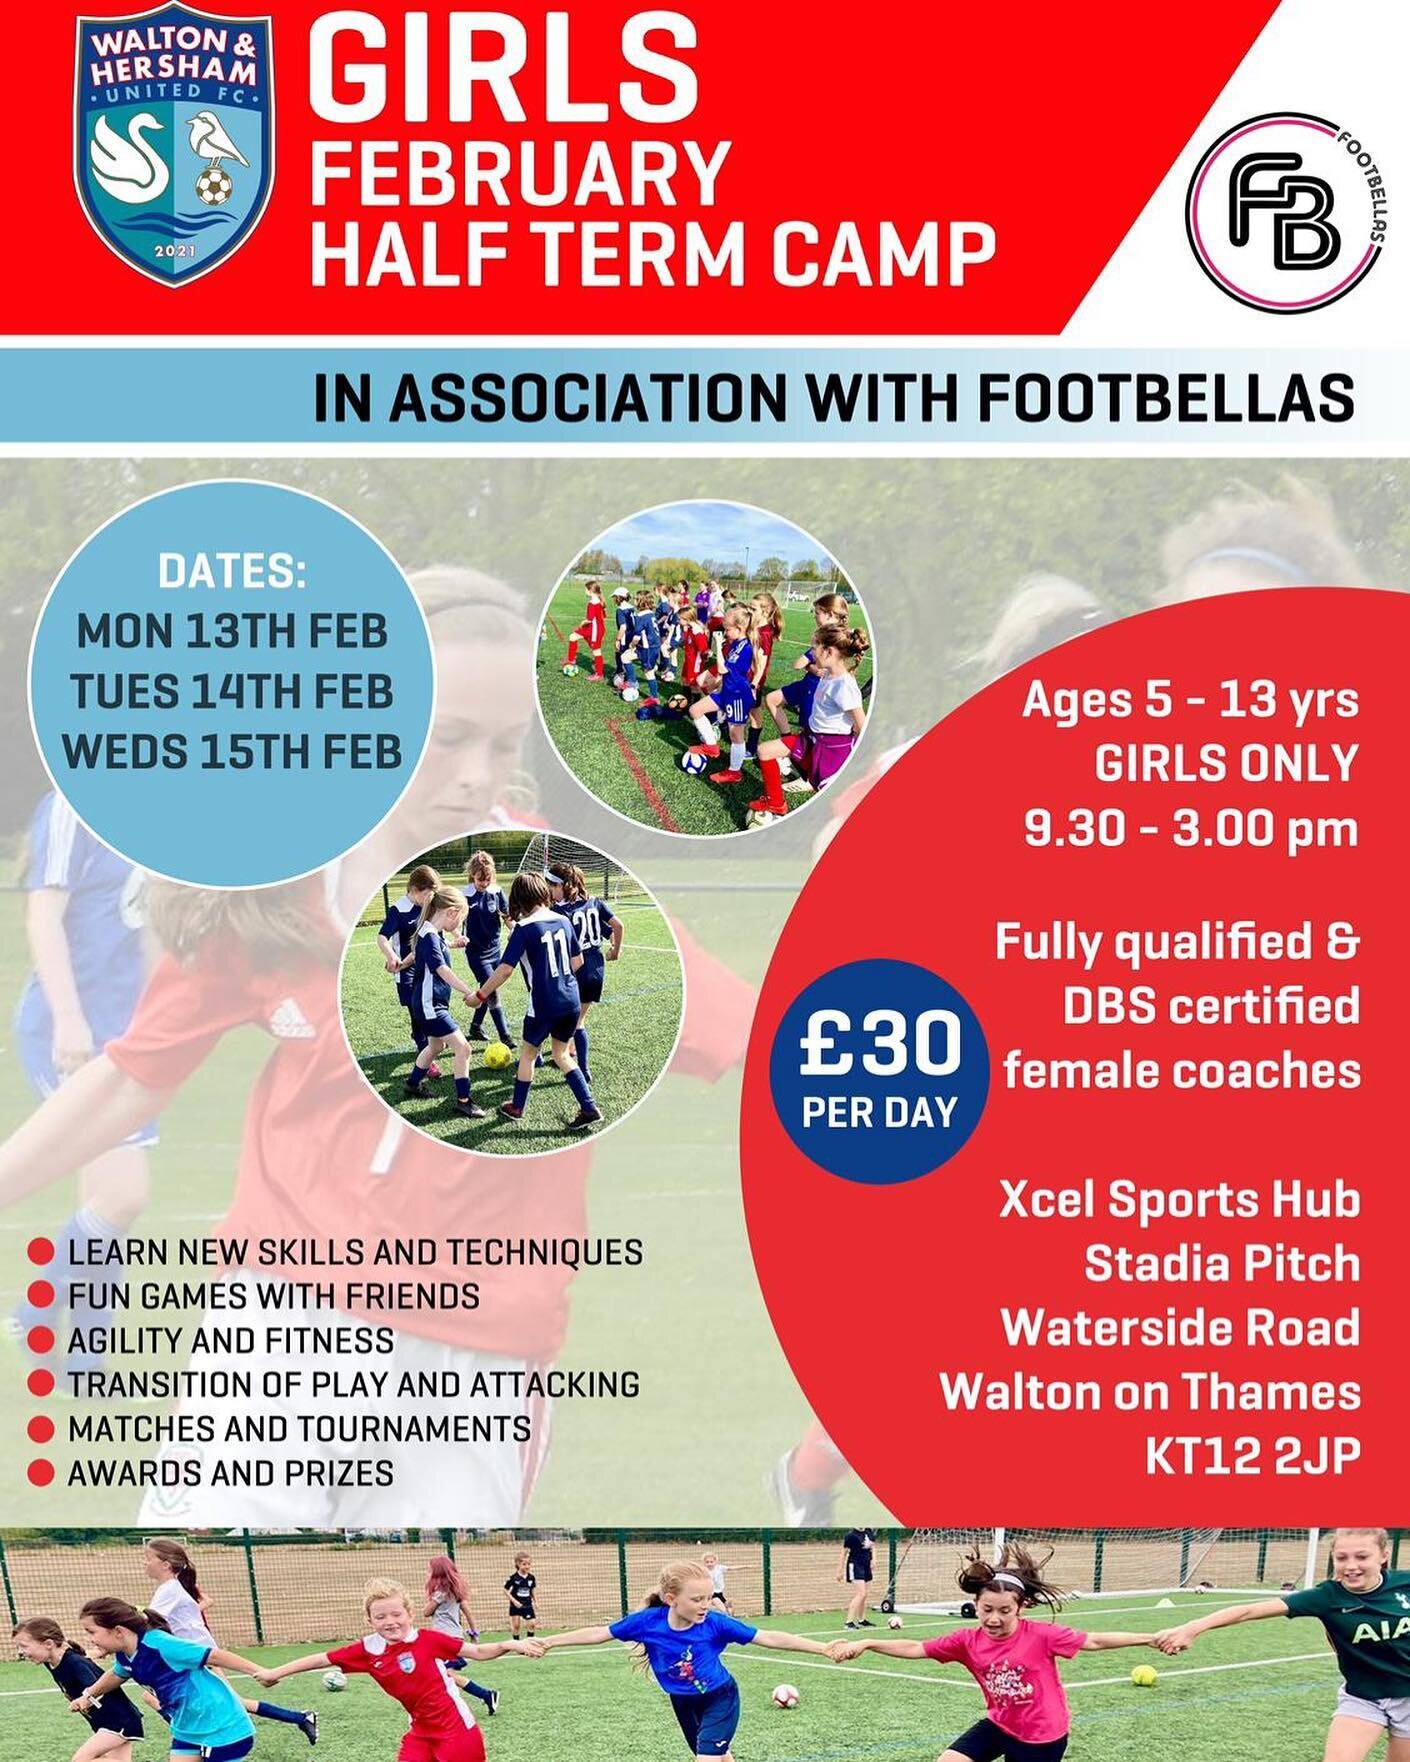 ⚽️ FOOTBELLAS &amp; W&amp;HUFC CAMP 

Footbellas and W&amp;HUFC have teamed up to bring you girls football camps for February half term at the Xcel sports hub. 

Monday 13th - Wednesday 15th February 

👭🏼Fun with friends 
⚽️ Skill based games tailo